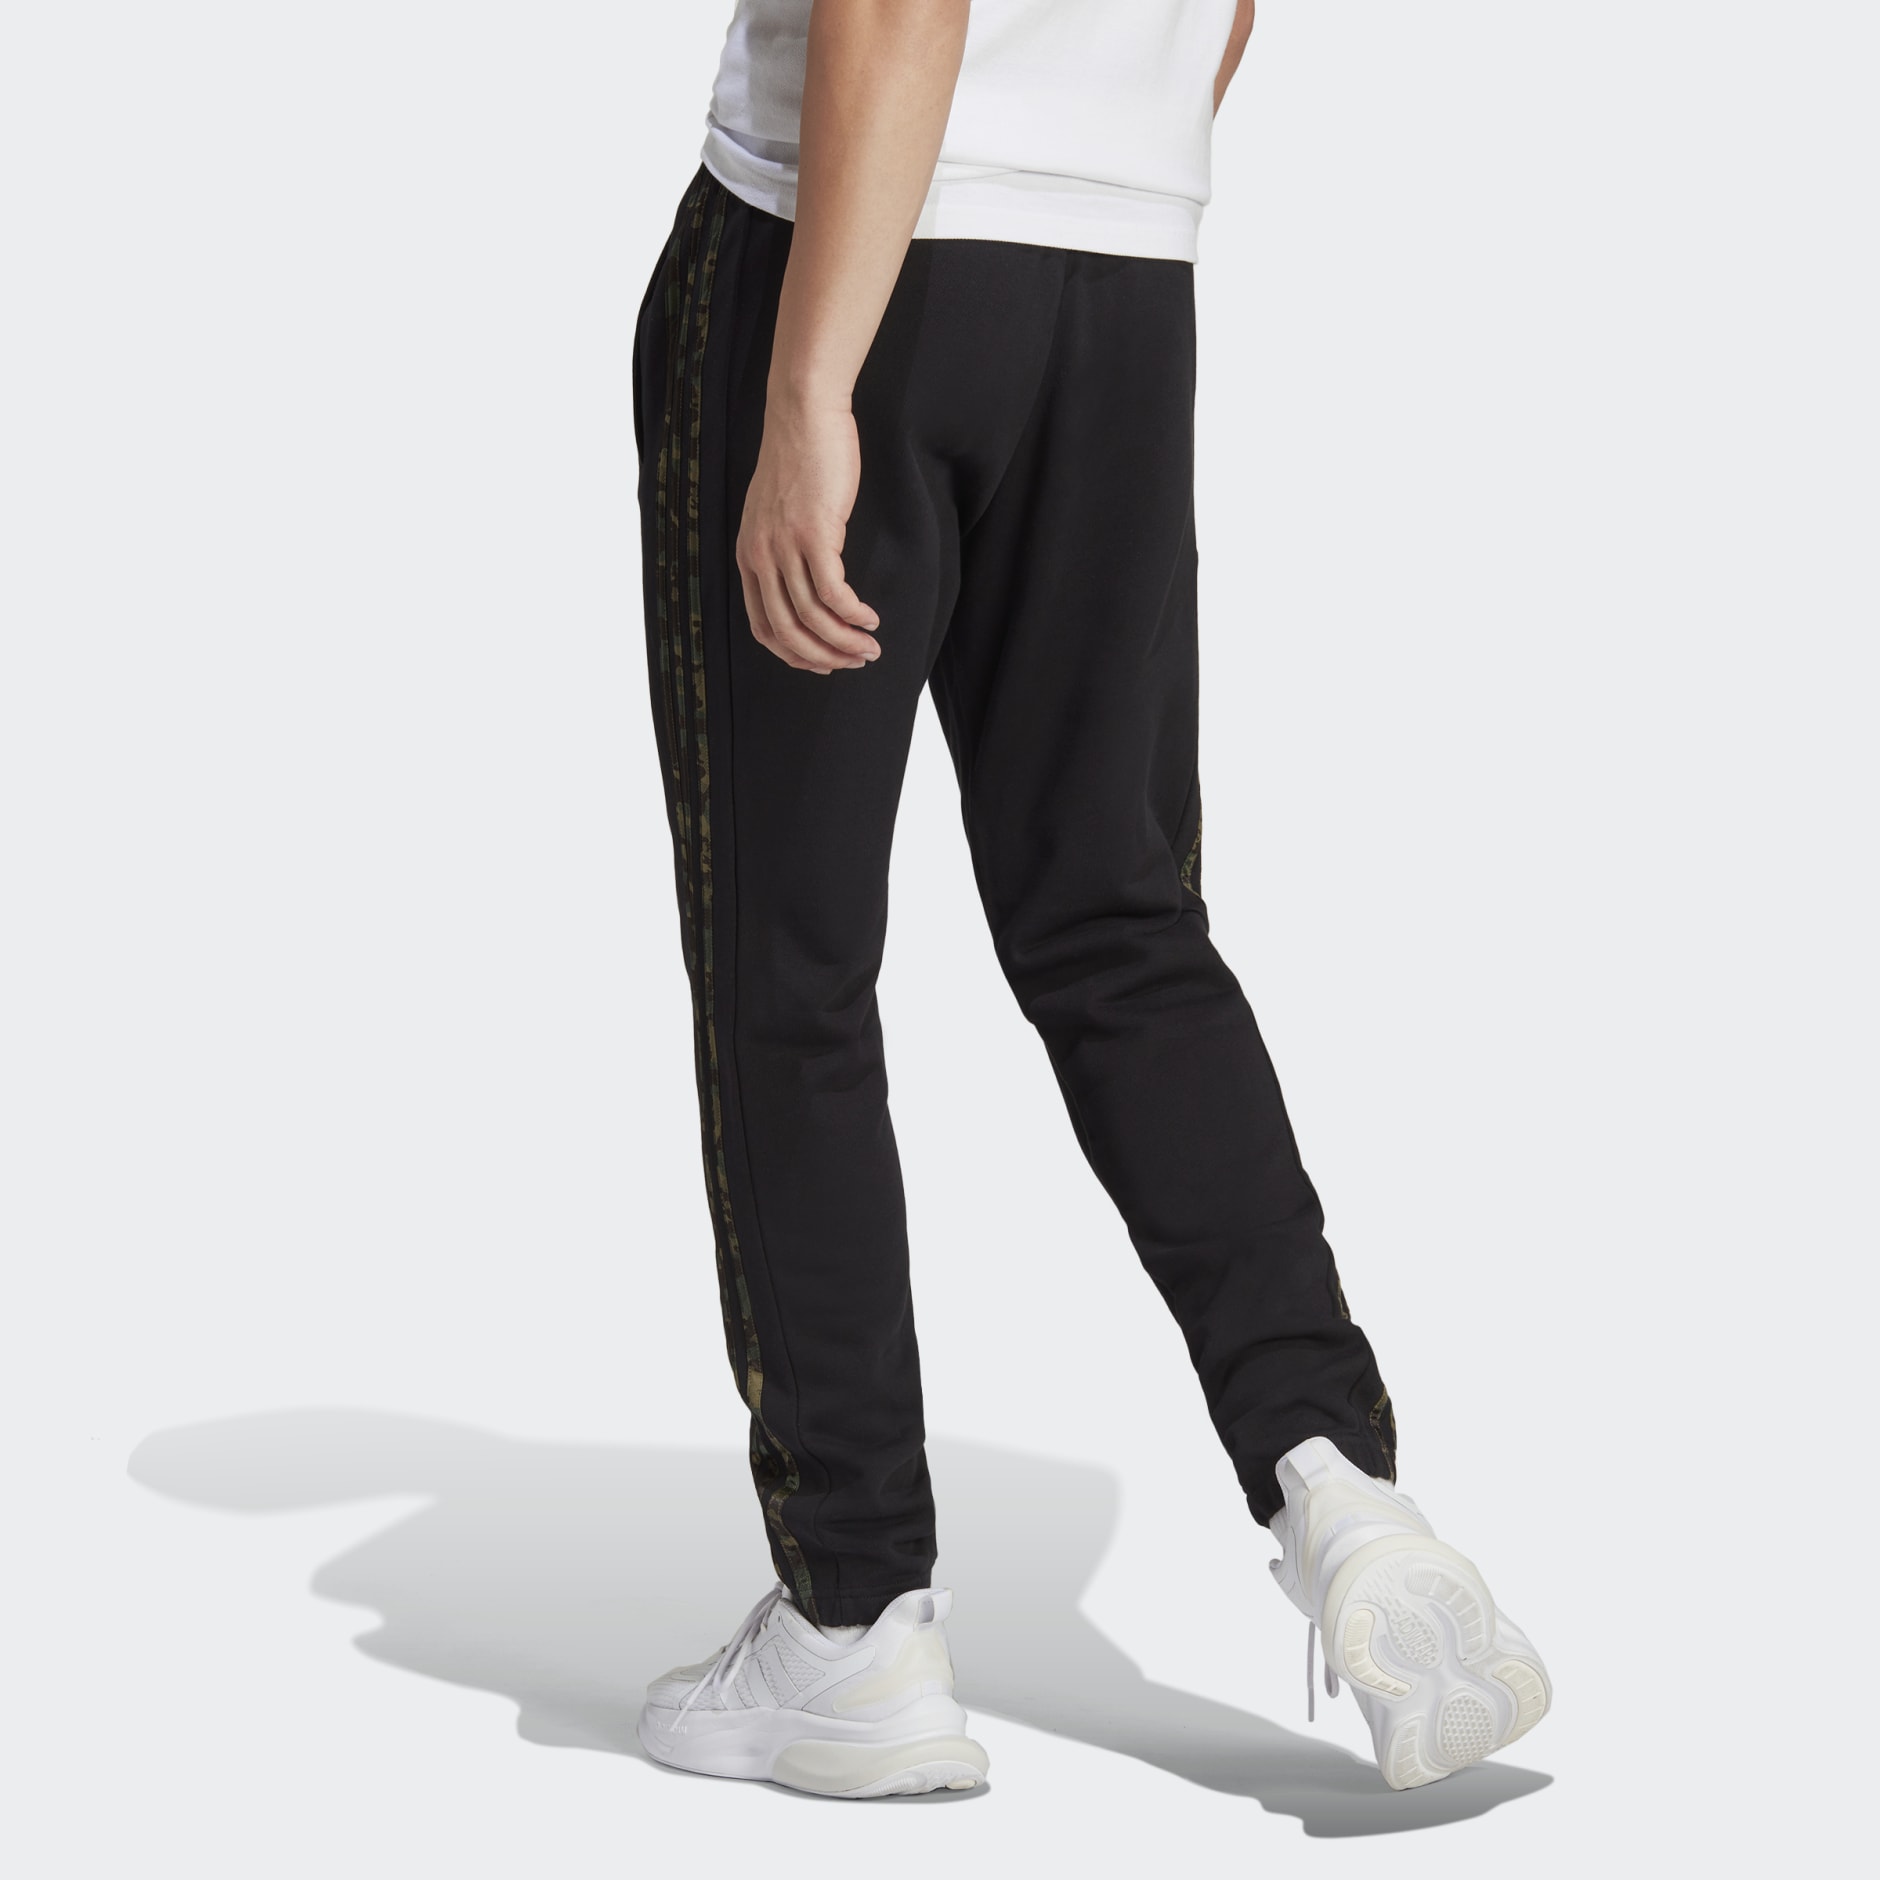 Elastic adidas adidas Pants 3-Stripes - | Black Essentials Cuff French GH Terry Tapered